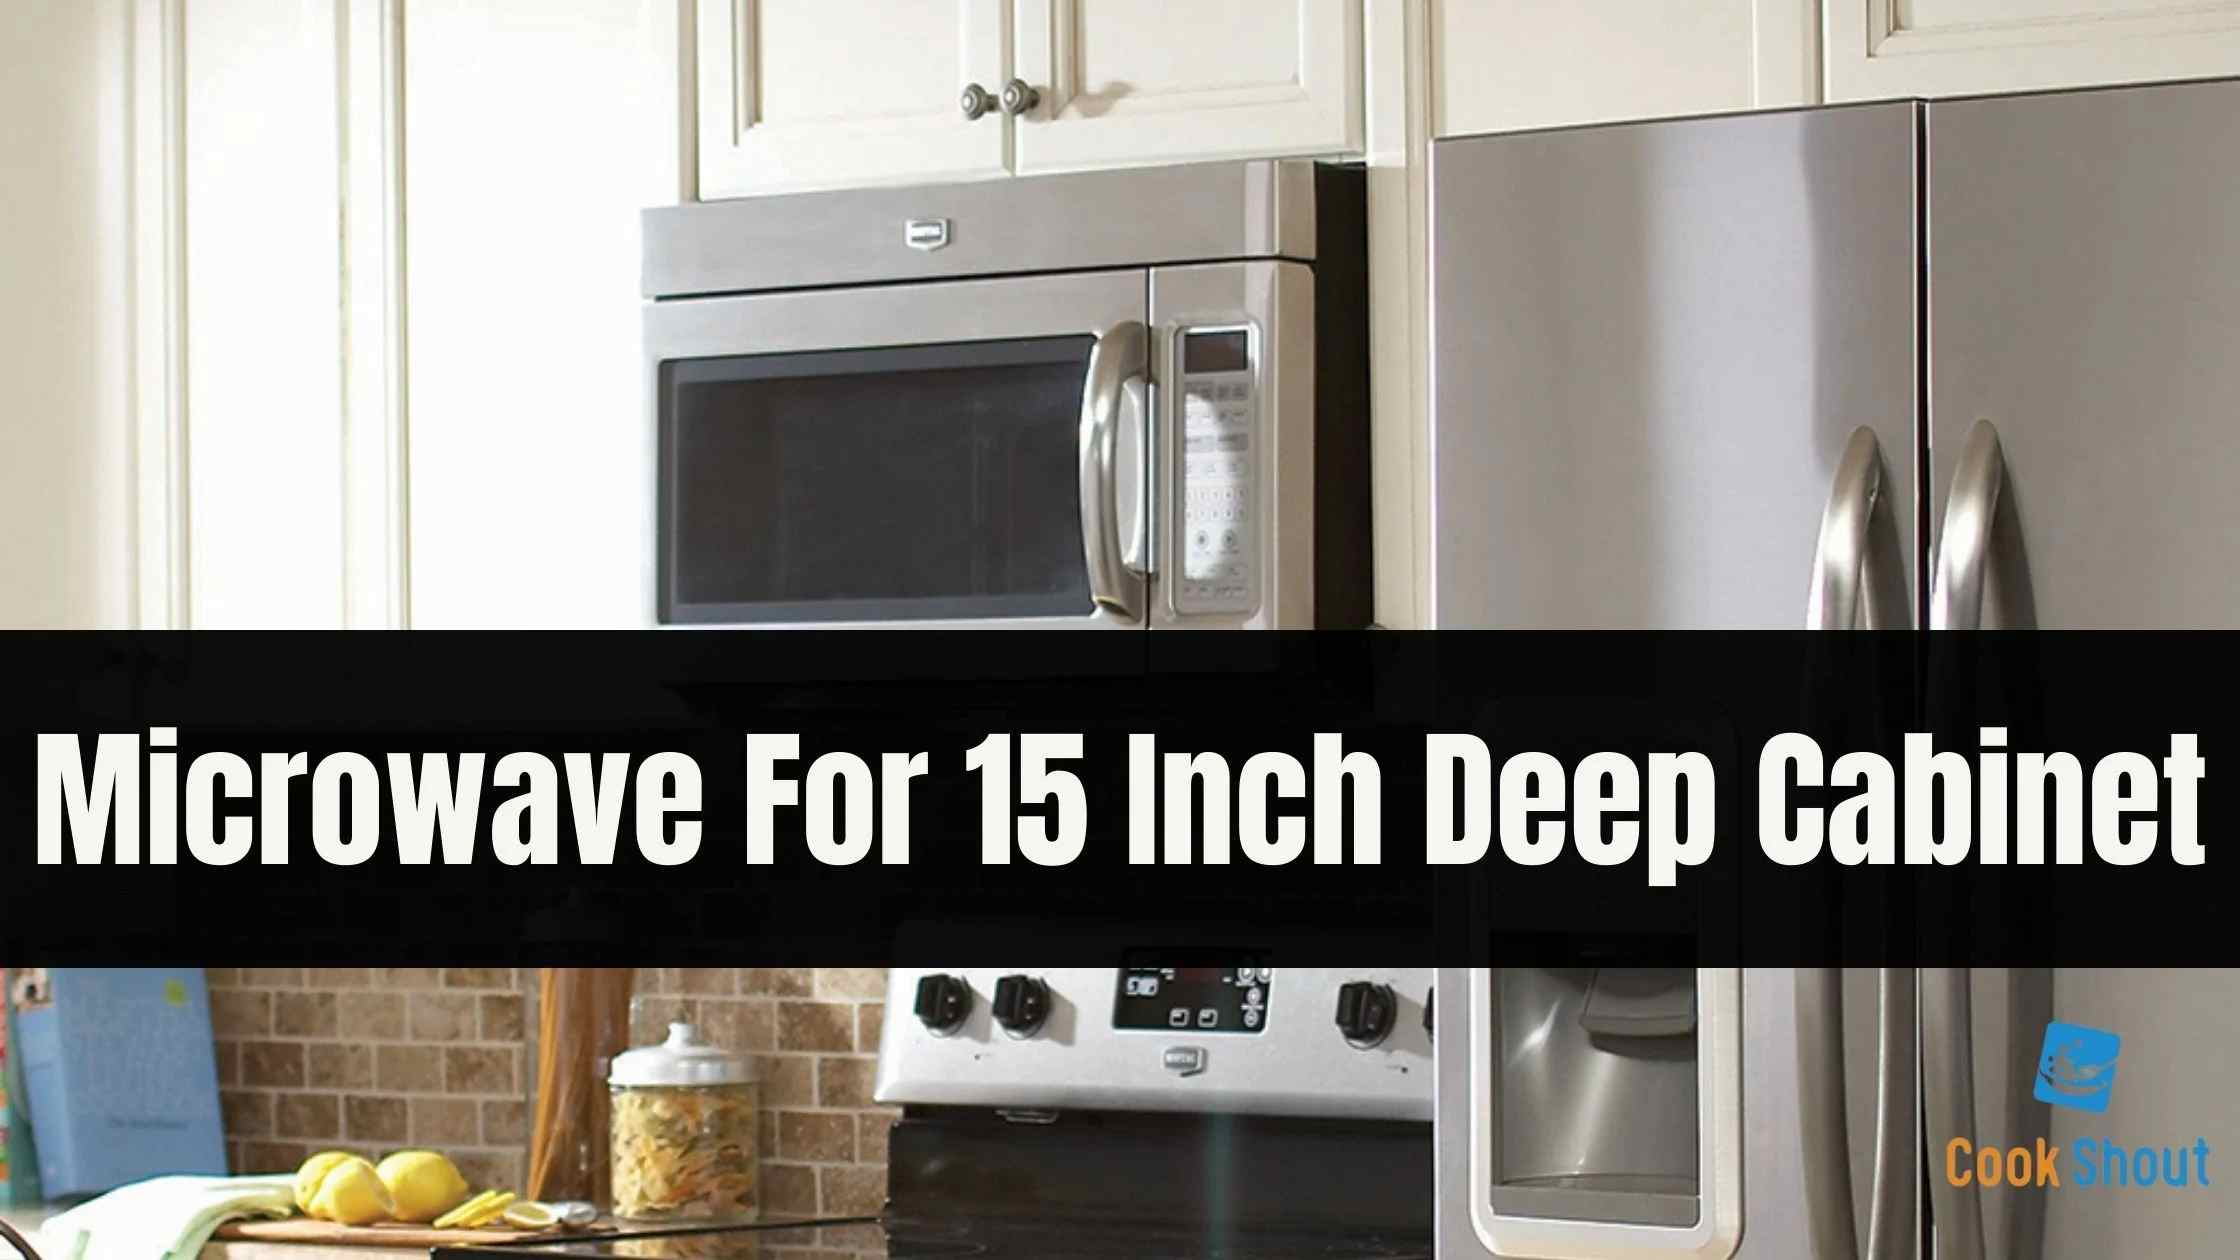 Microwave For 15 Inch Deep Cabinet